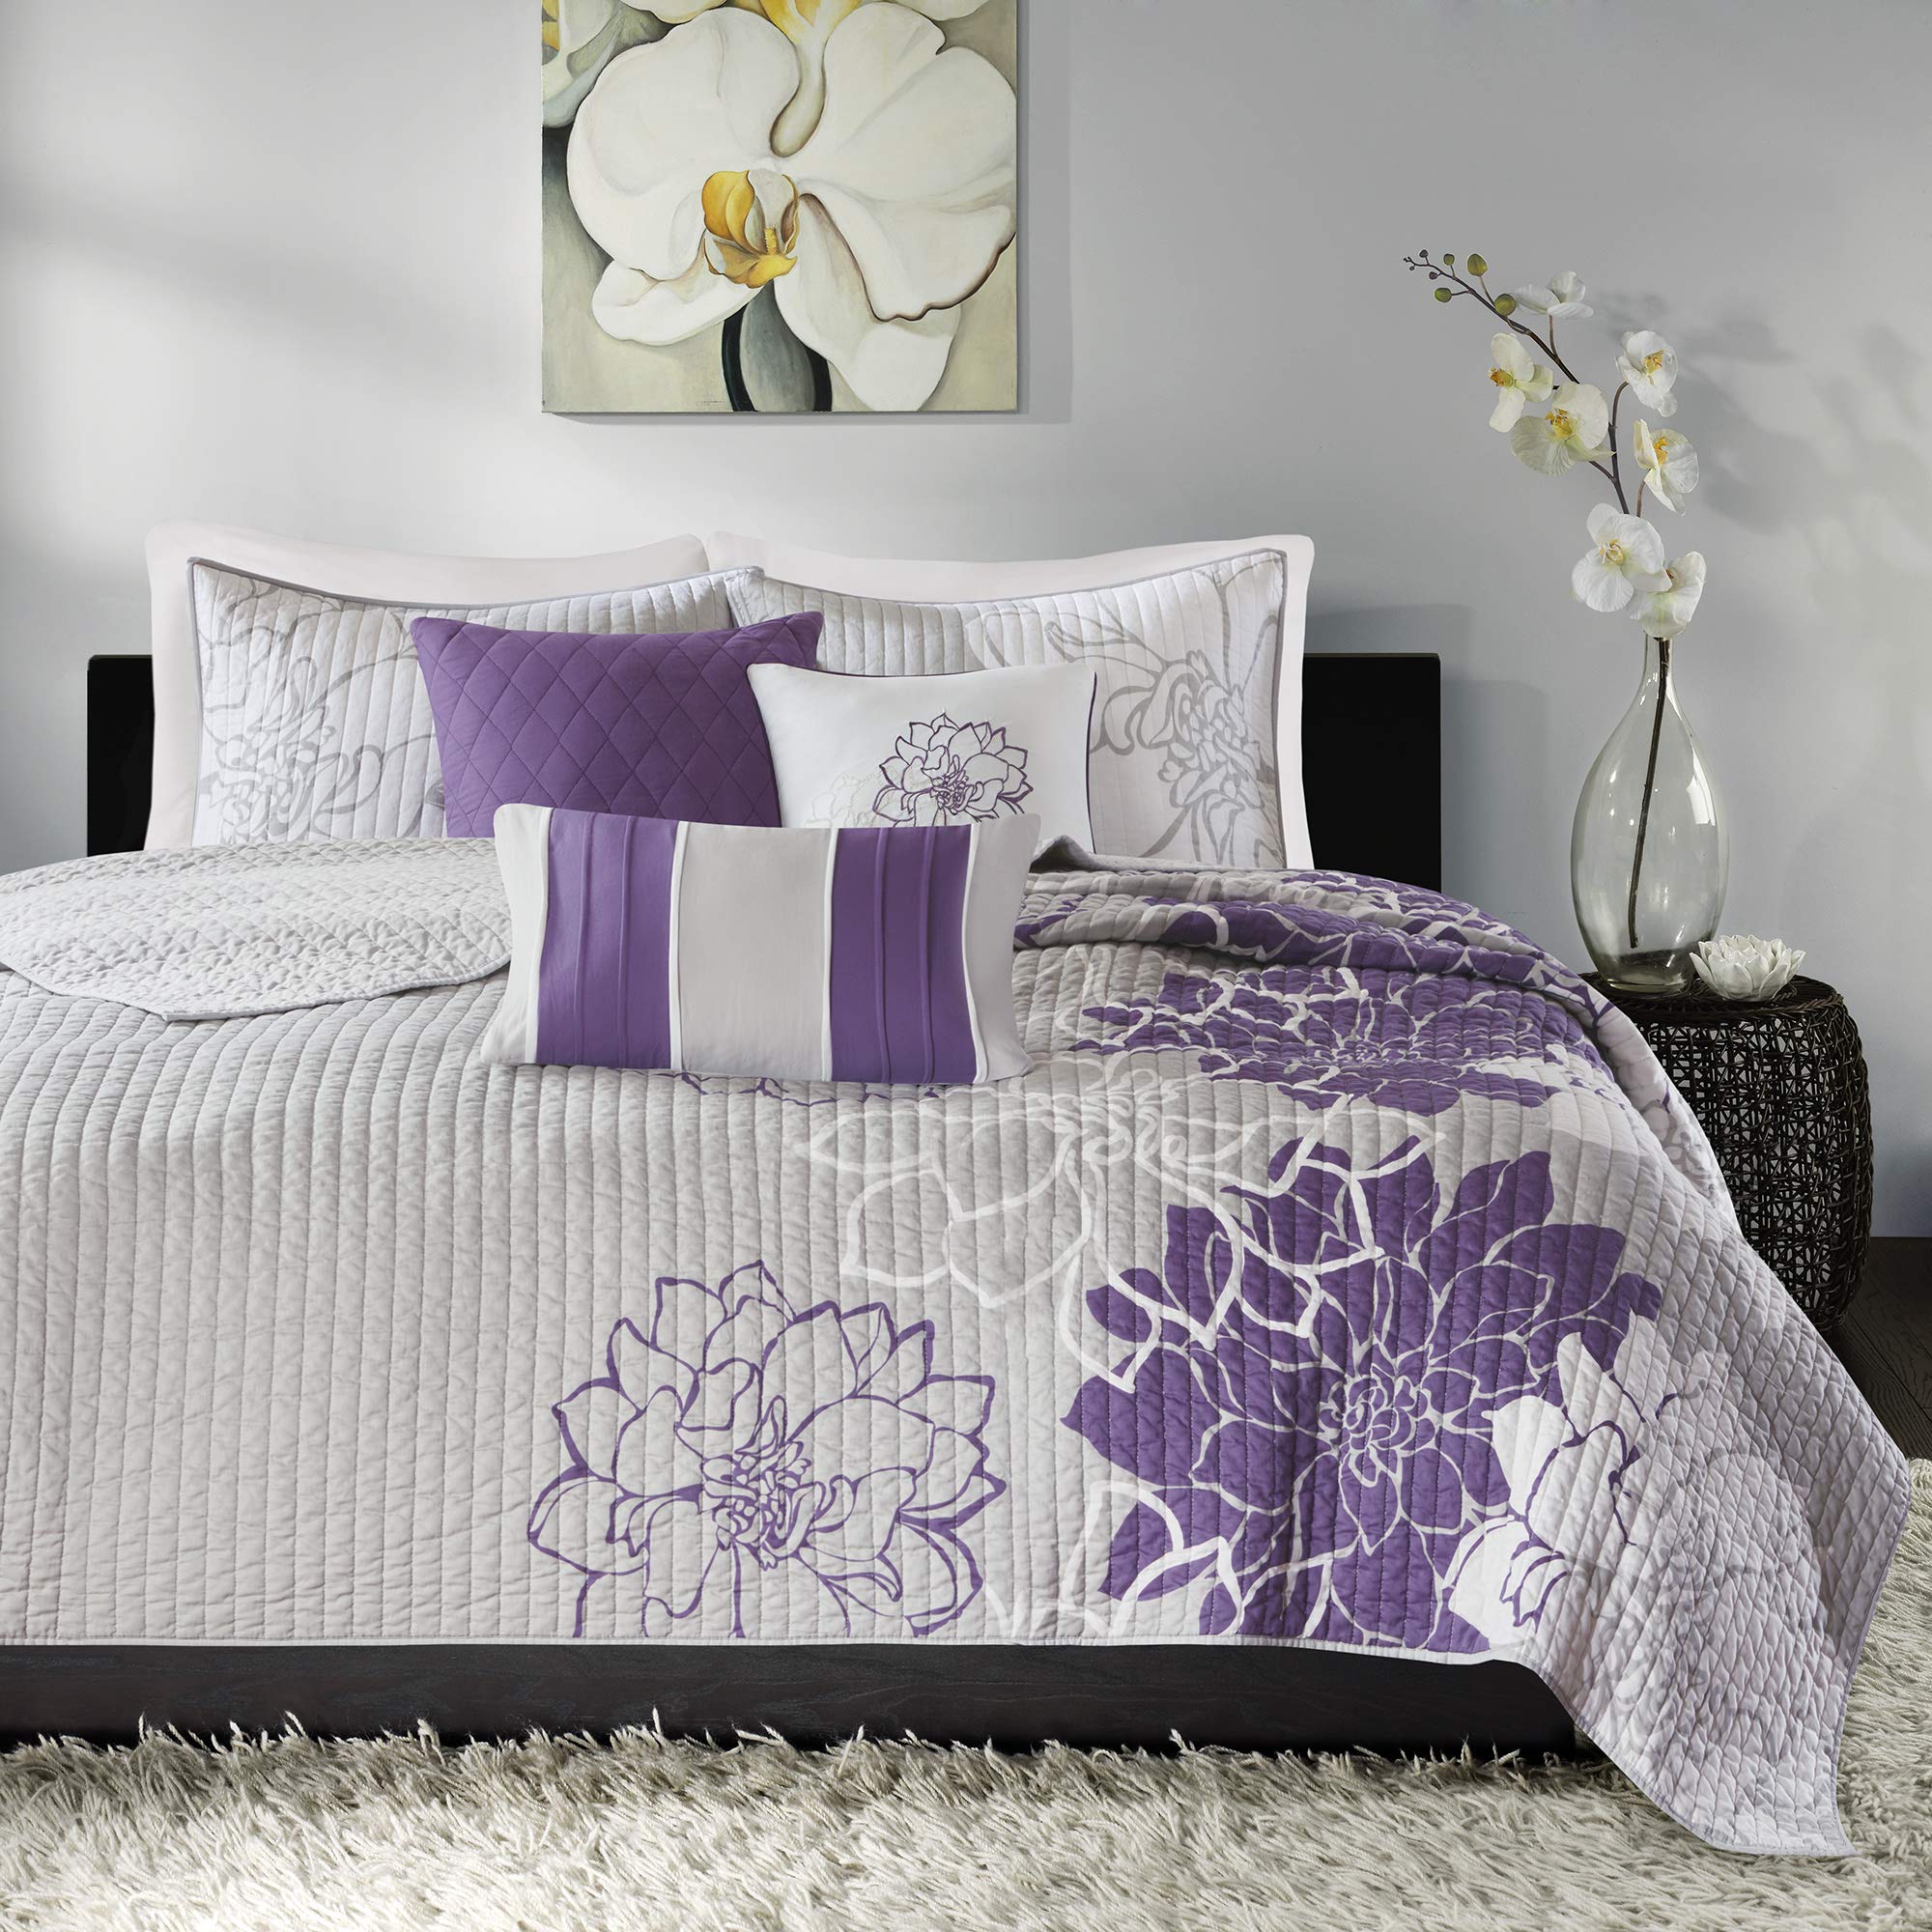 Book Cover Madison Park Lola 100% Cotton Quilt Set-Casual Floral Channel Stitching Design All Season, Lightweight Coverlet Bedspread Bedding, Shams, Decorative Pillows, Full/Queen (90 in x 90 in), Purple 6 Piece Lola Purple Full/Queen(90